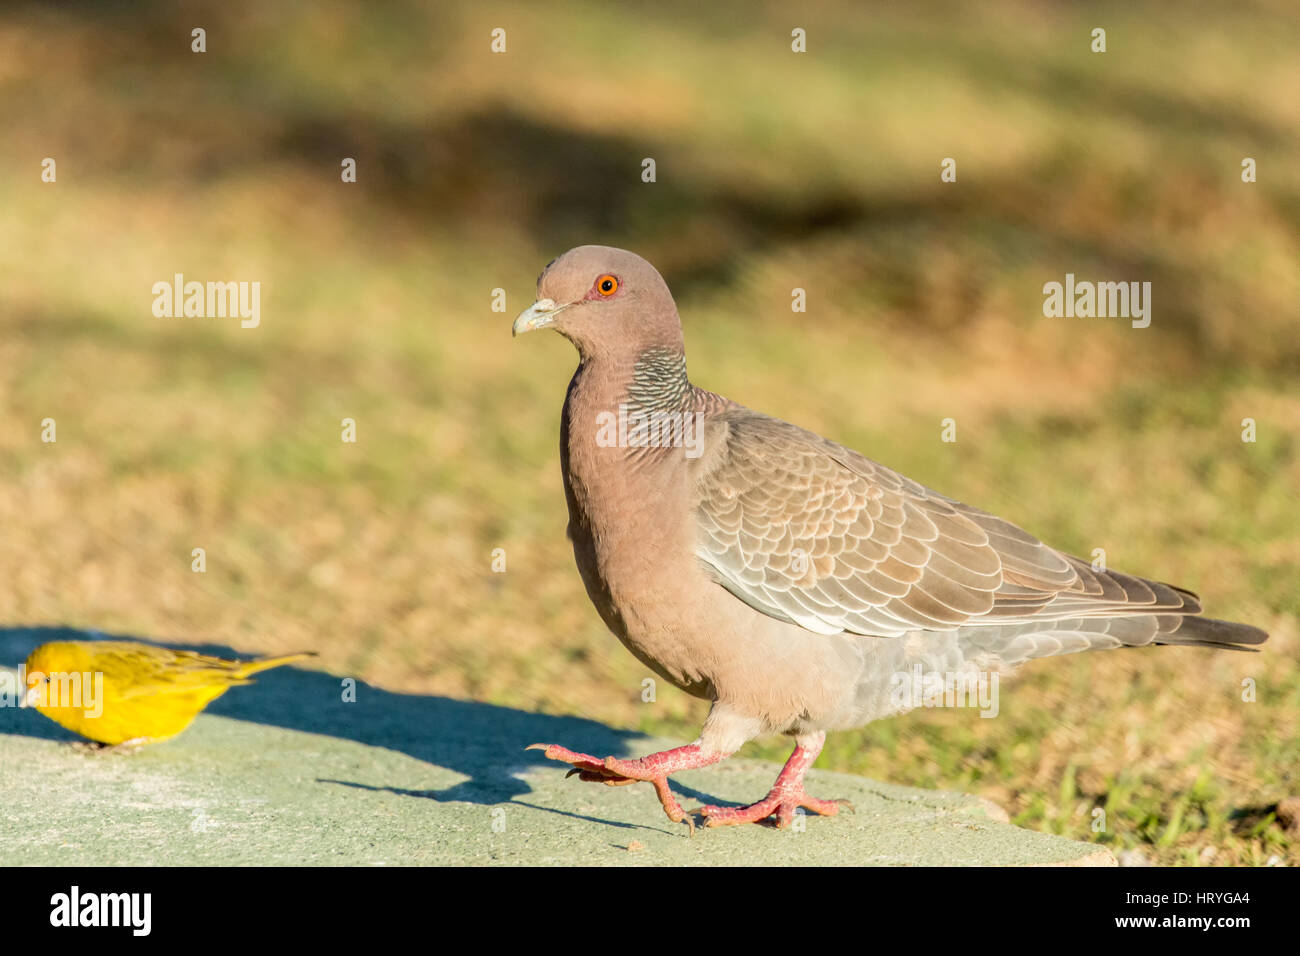 Picazuro Pigeon and Saffron Finch at a ground birdfeeder in the Pantanal region of Brazil, Mato Grosso, South America Stock Photo